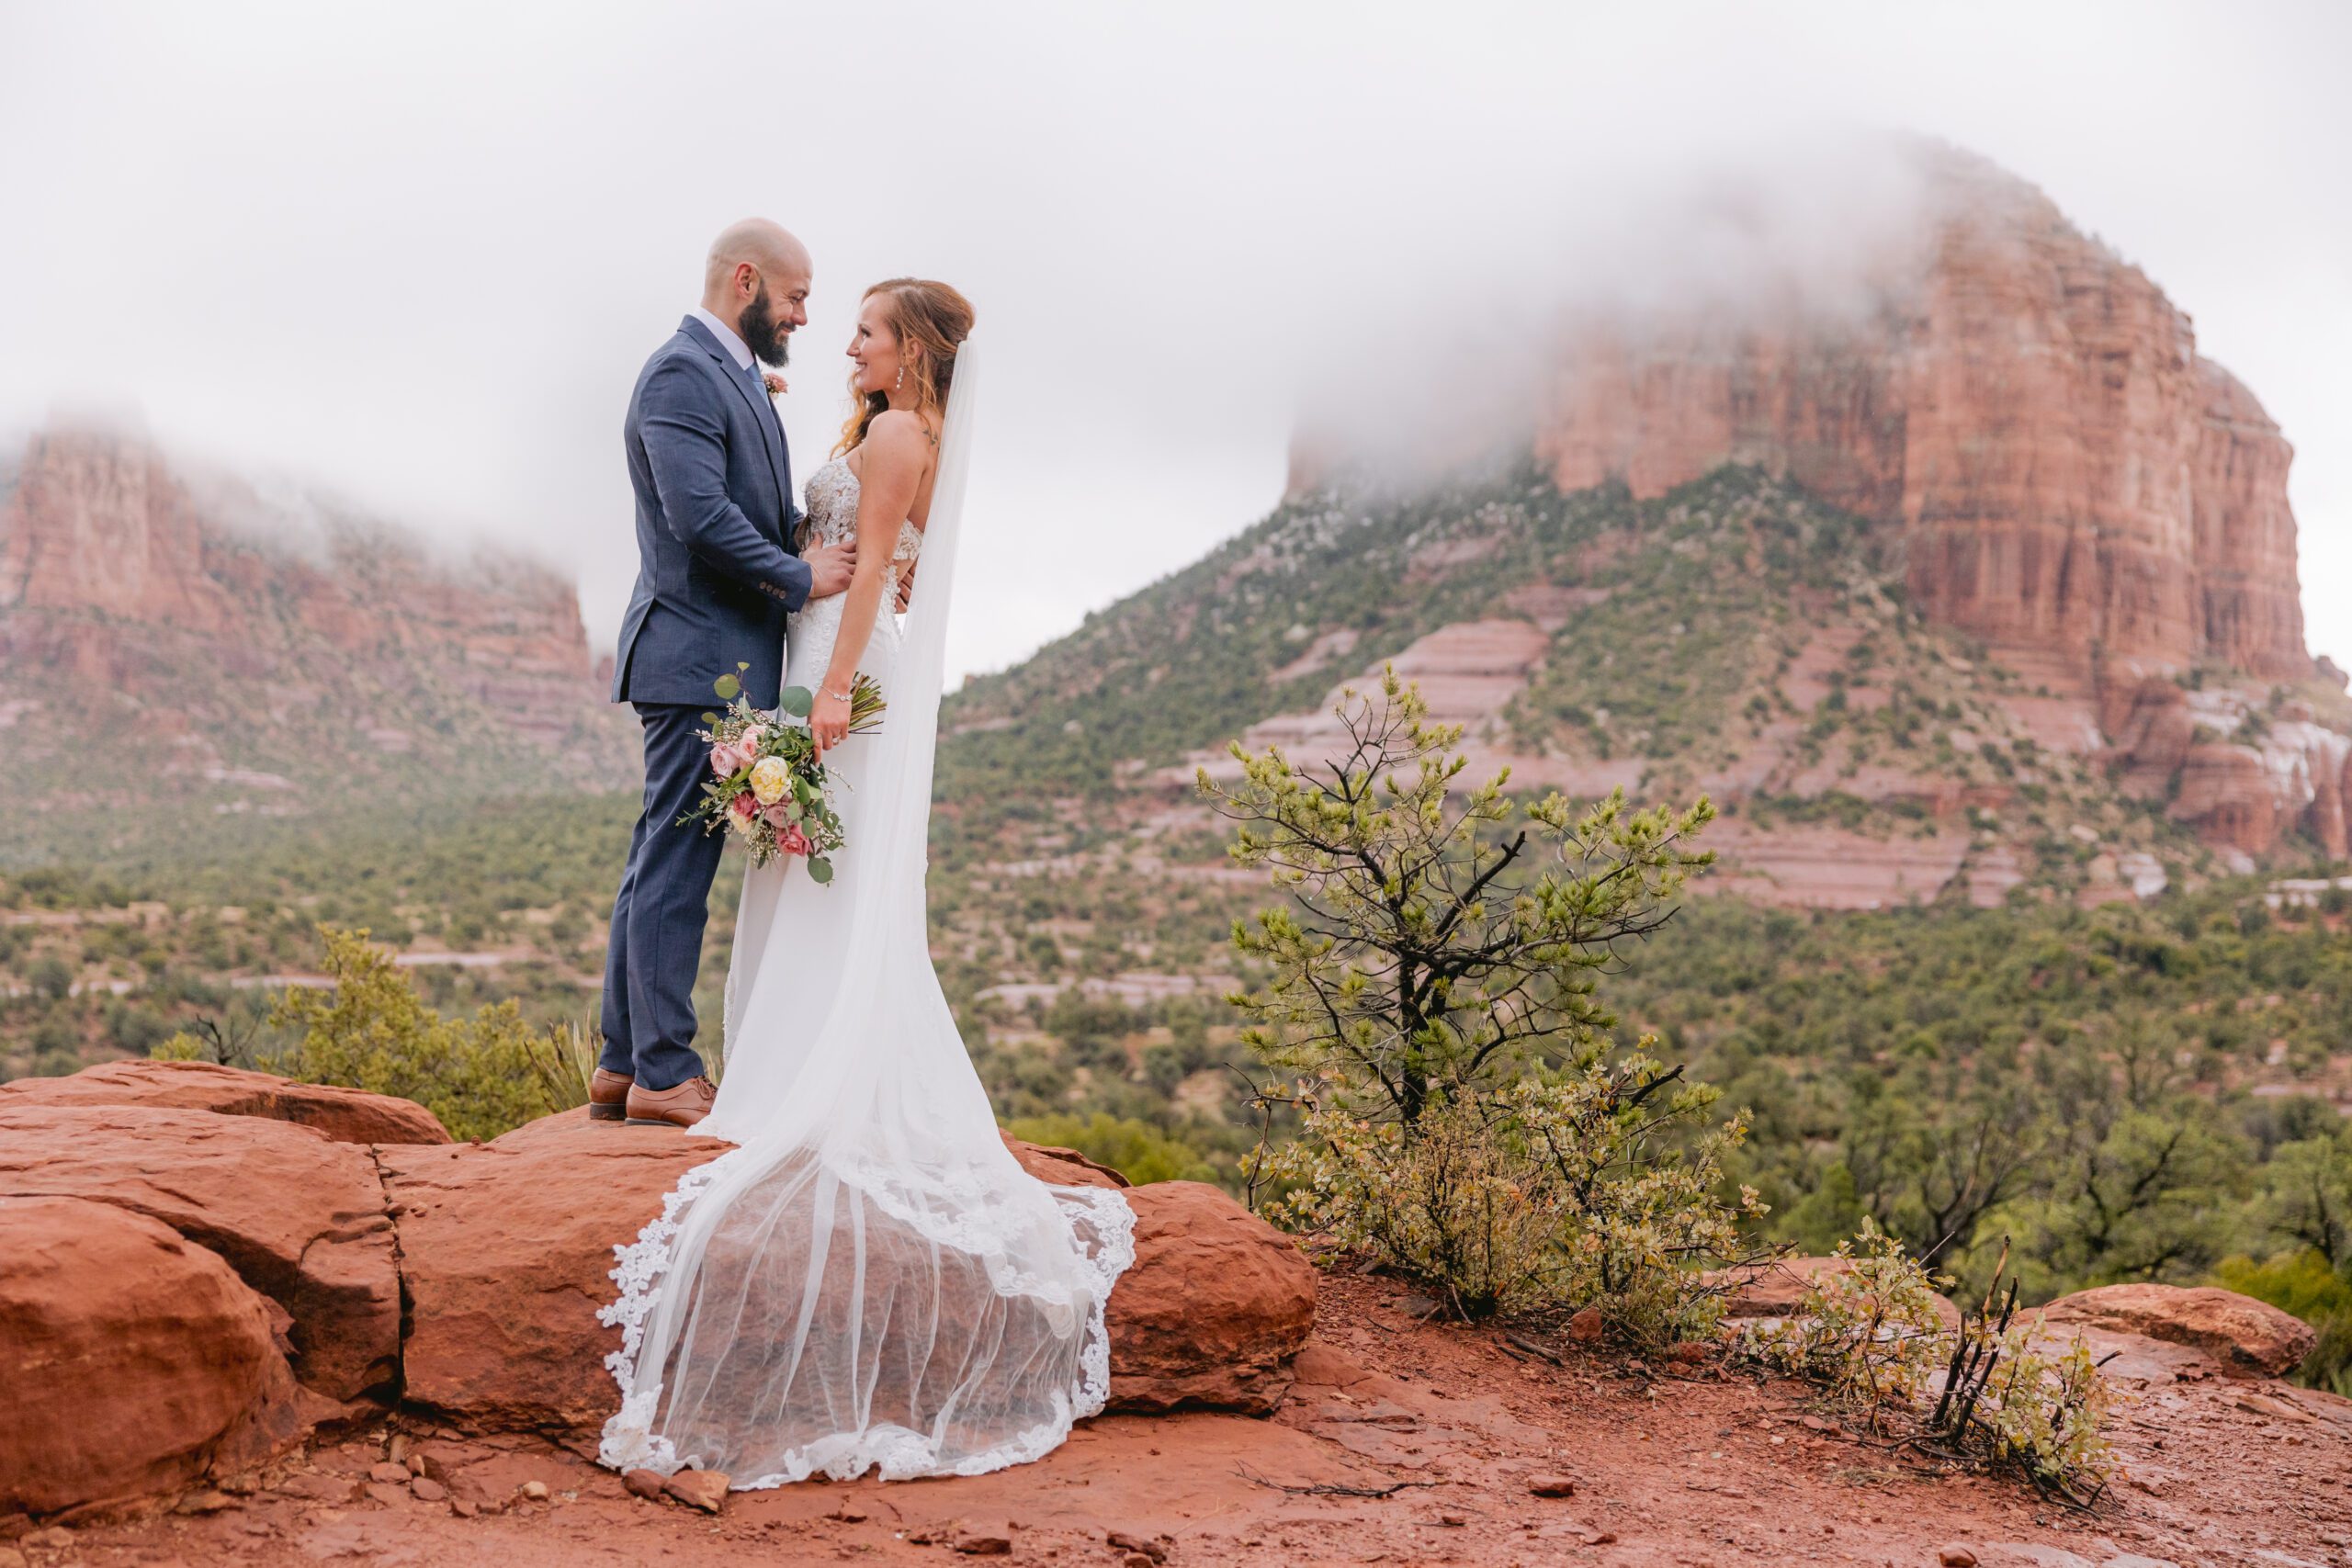 Bride and groom look at each other and smile. The bride is wearing a long white dress with a long veil that drapes over the red rocks. Behind them are low cloud cover over the red rocks. The bride is holding a floral bouquet with soft pinks and ivory and greens. Her hair is red and the groom has a dark beard.